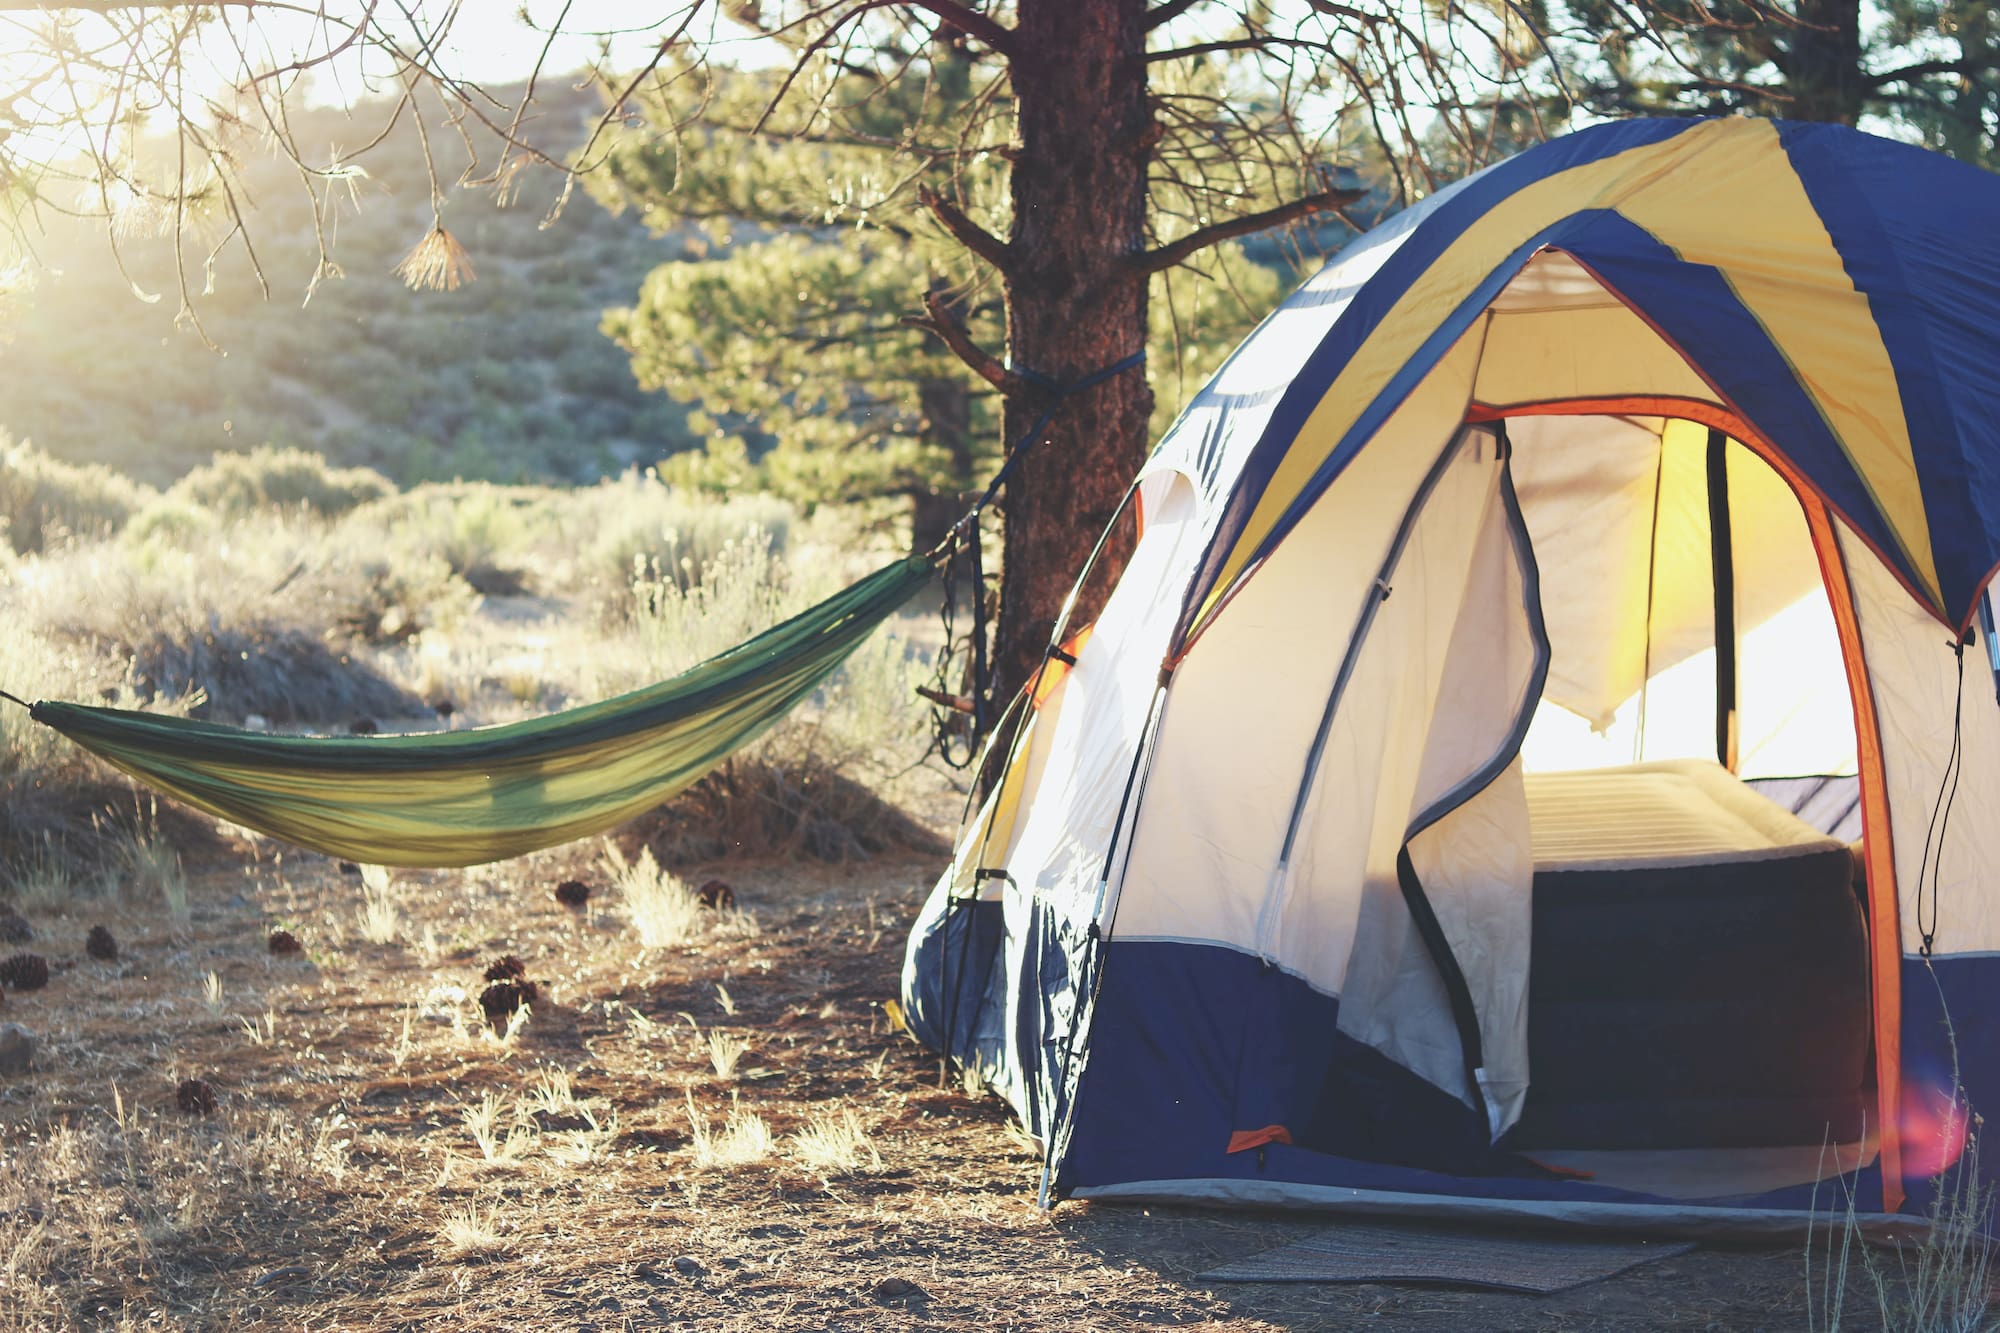 Camping: yes or no?